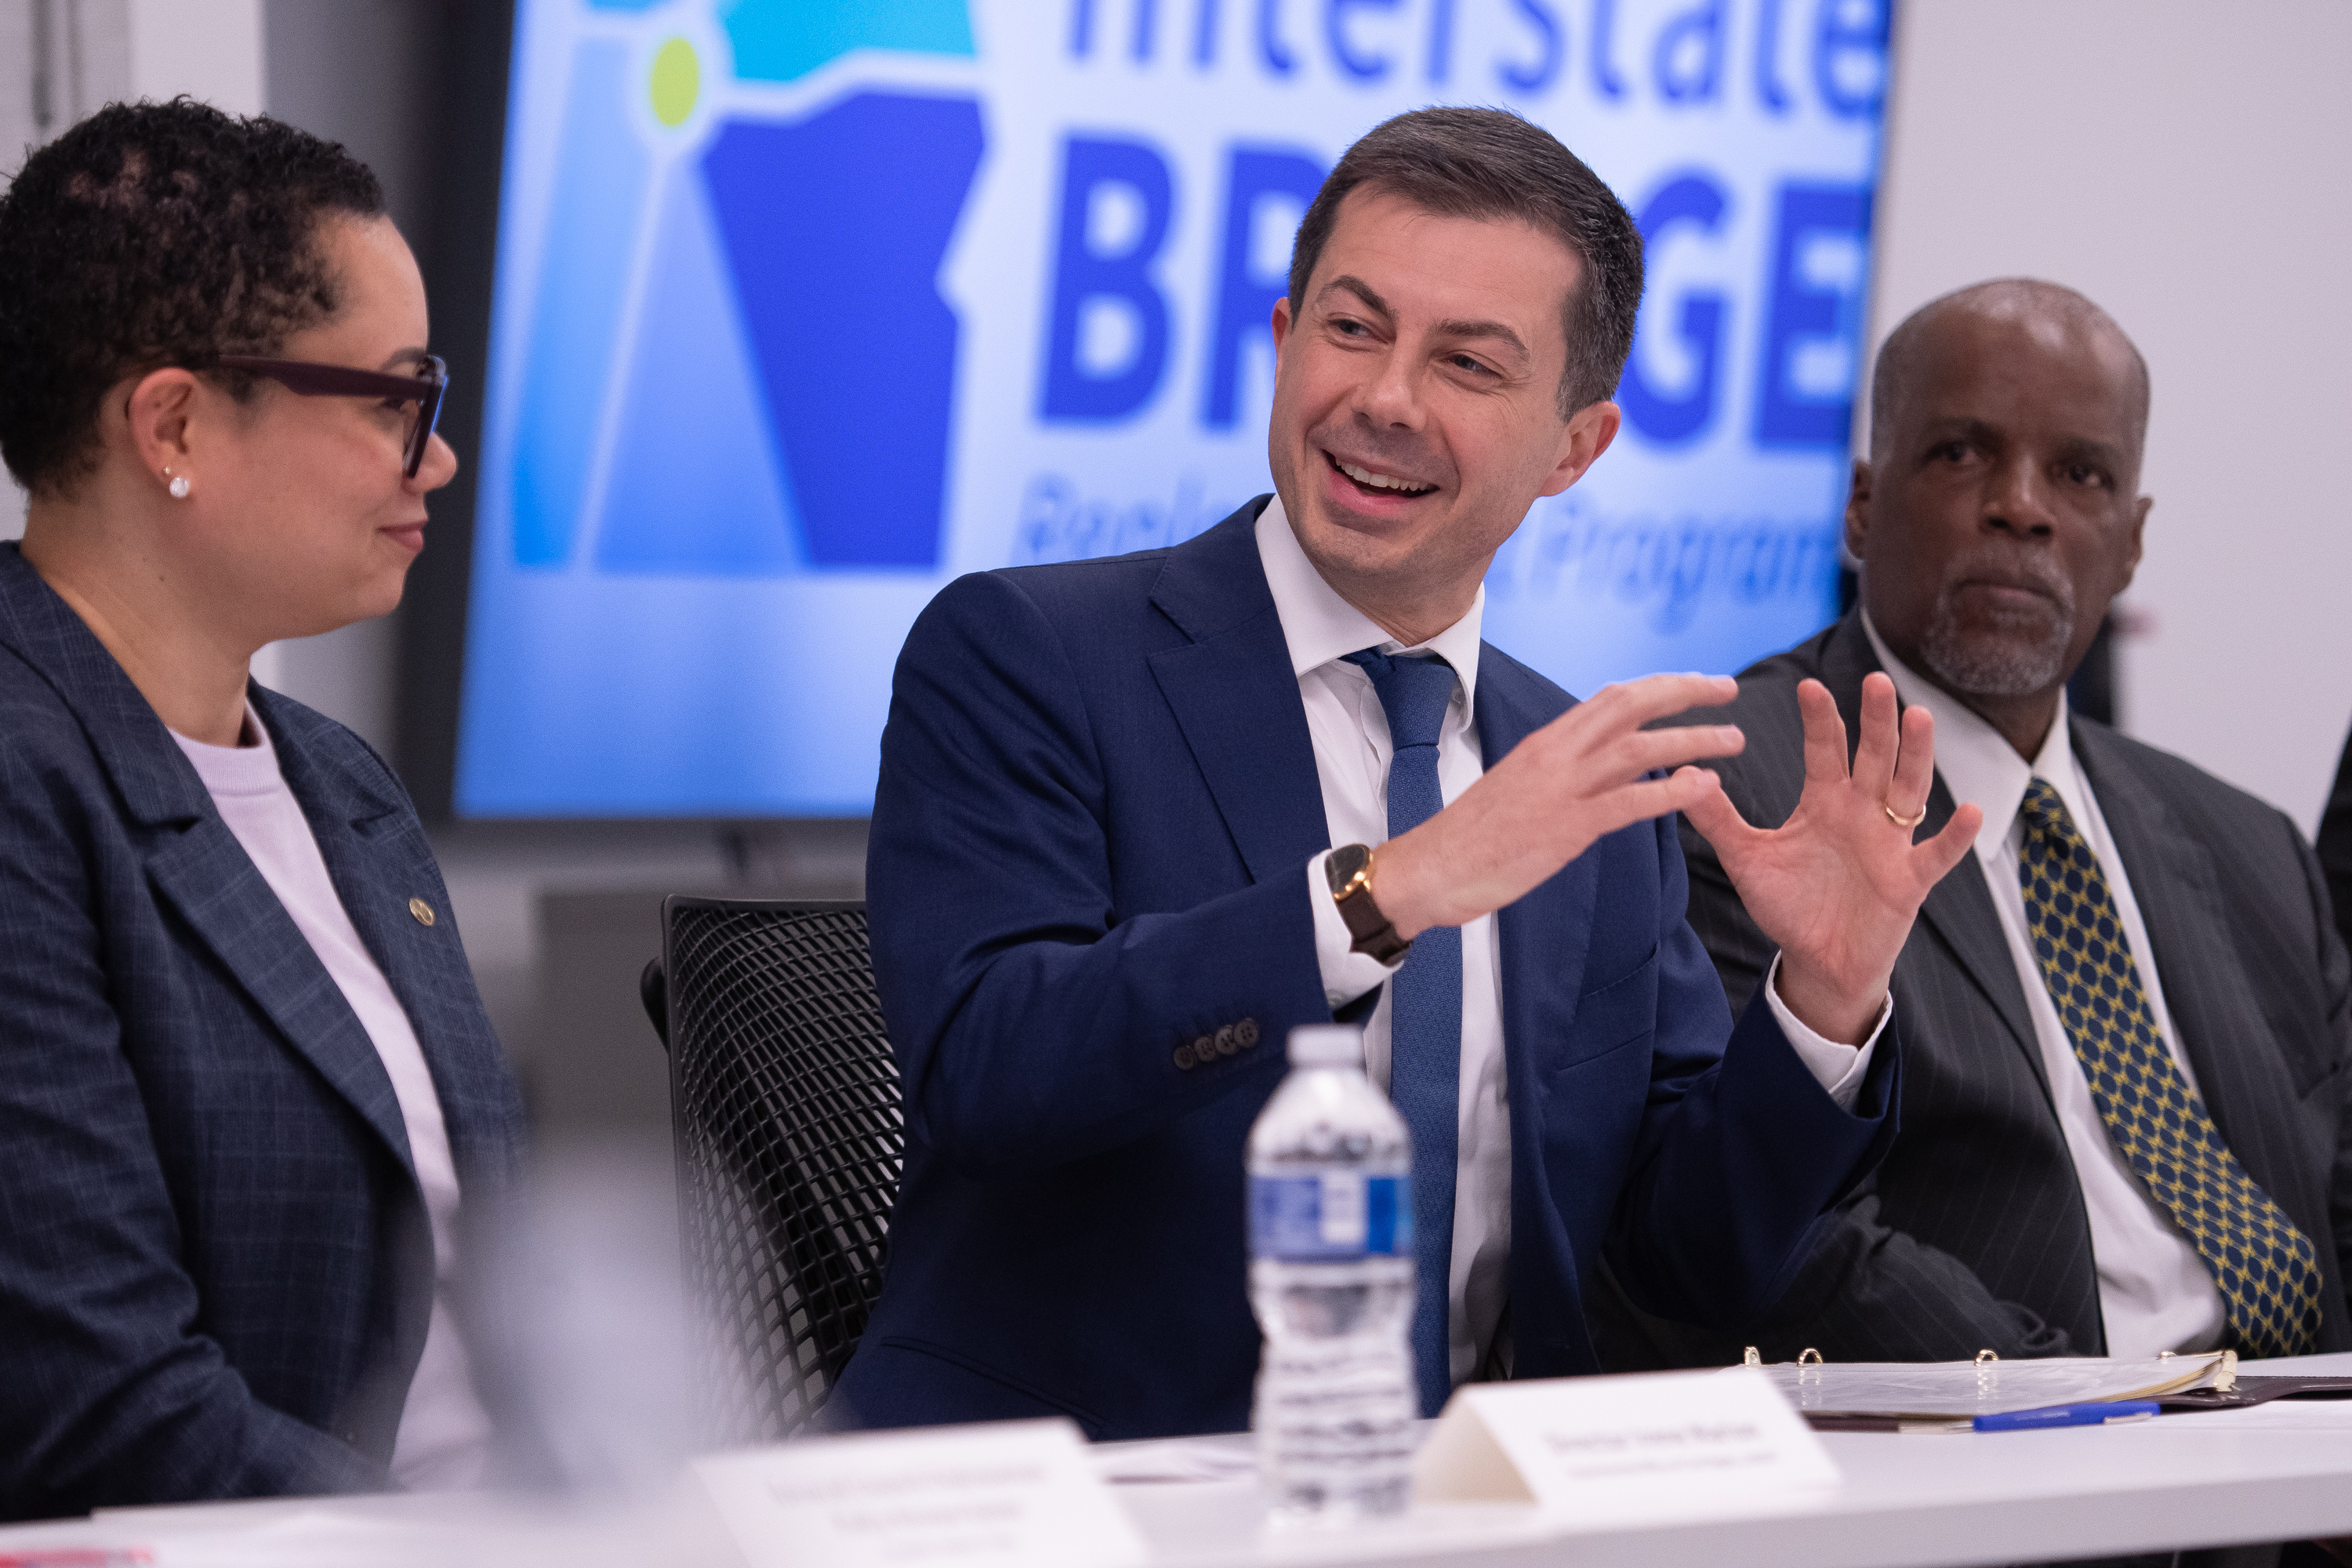 U.S. Secretary of Transportation Pete Buttigieg pictured in an IBR roundtable event